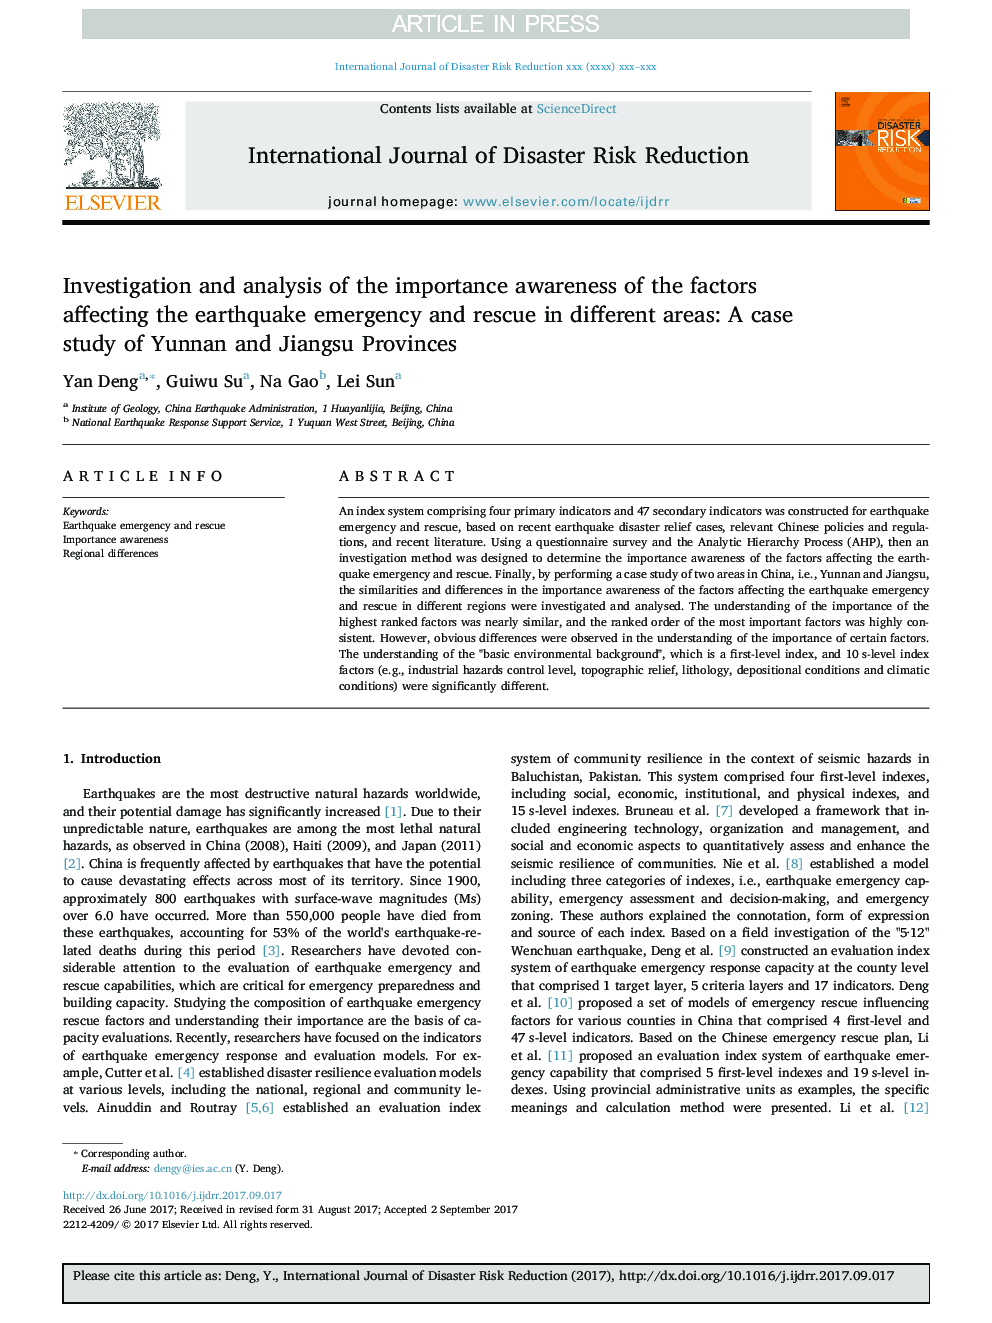 Investigation and analysis of the importance awareness of the factors affecting the earthquake emergency and rescue in different areas: A case study of Yunnan and Jiangsu Provinces